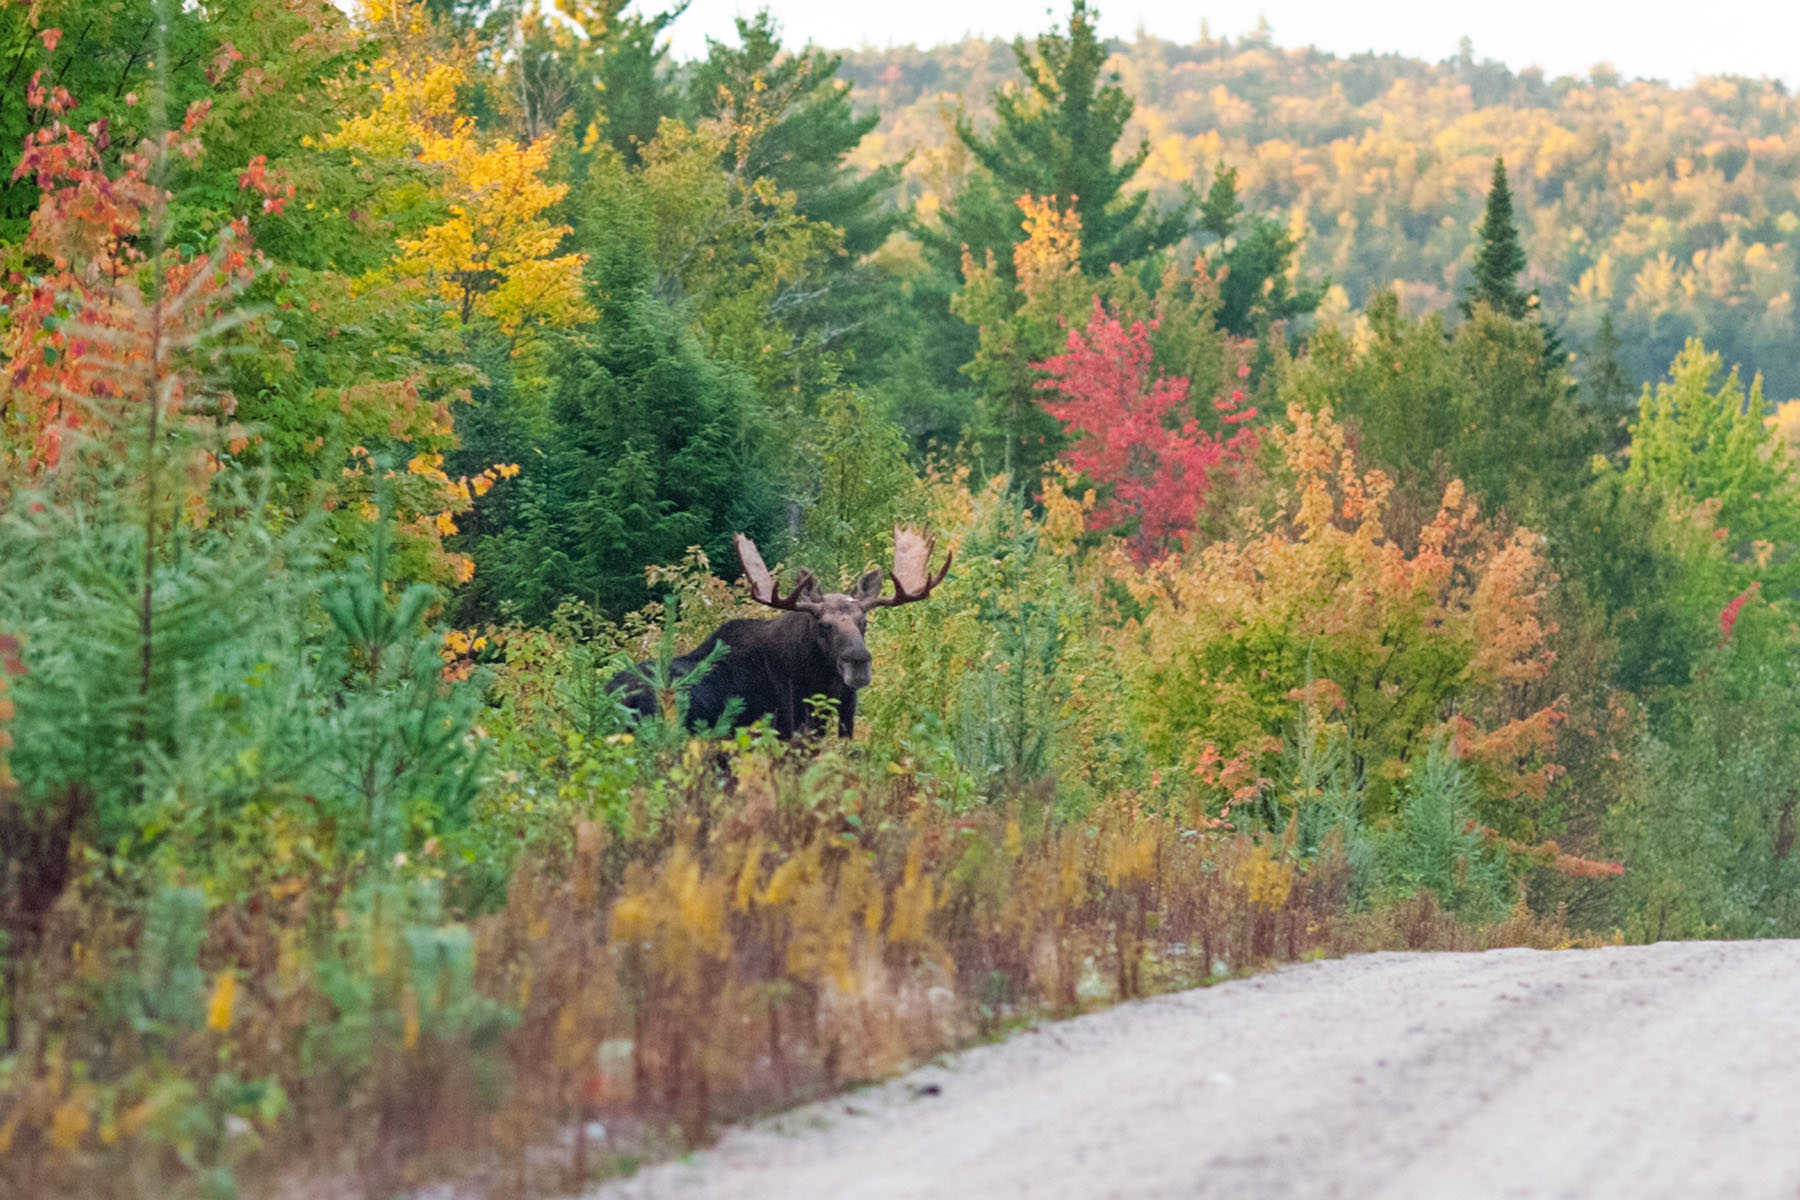 Moose, central Maine, October 2003.  The only bull moose with antlers I saw on this trip.  Click for next photo.